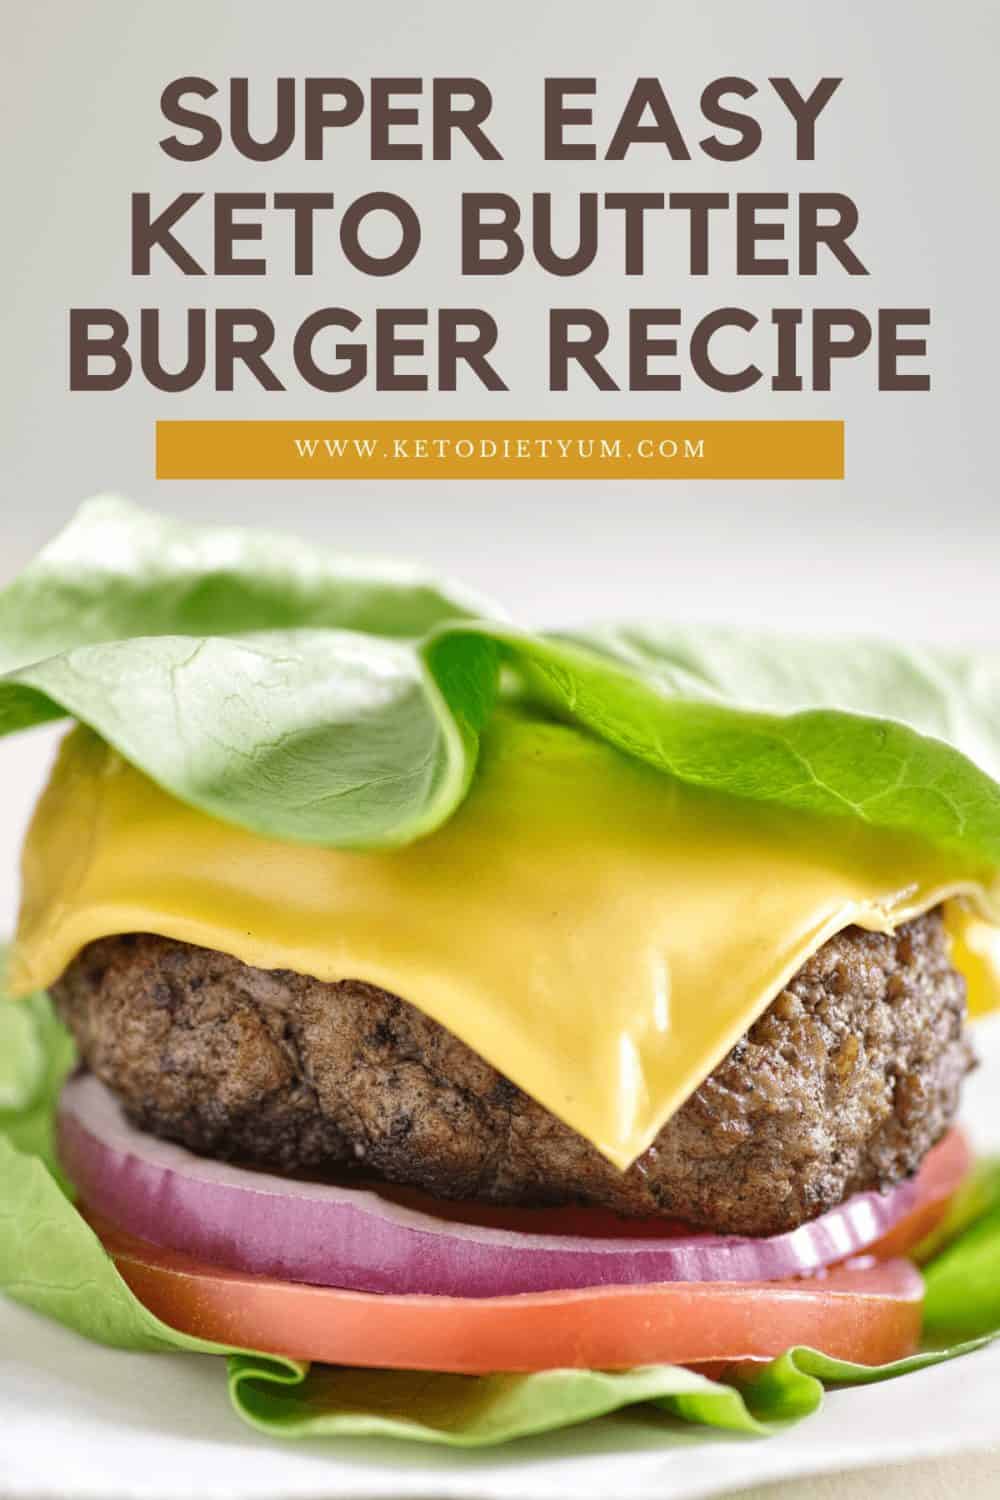 These super low-carb Keto Butter Burgers are the ultimate treat! Super easy to make you can eat them any time of the day. They're loaded with a savory flavor with the crispy burger patty and oozing cheese. #ketodiet #loseweight #ketogenicdiet